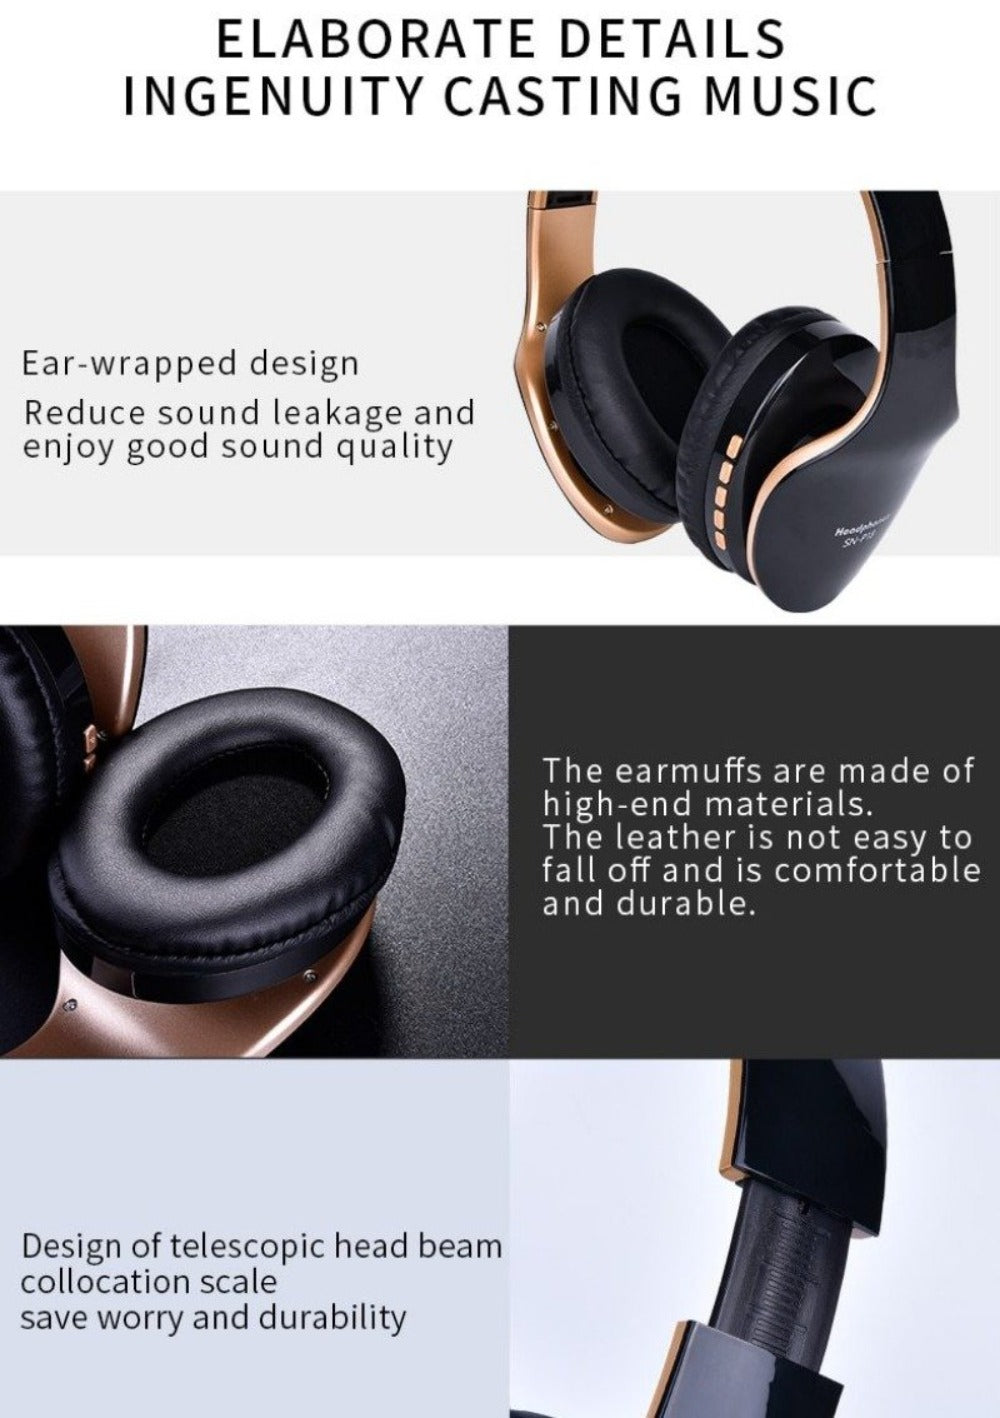 Everyday.Discount buy headphone unisex overear with microphone dynamic bass foldable headphone instagram travel vacations tiktok works facebookvs gaming music by phone noise cancellation headphone for television for iphone ios apple's samsung android devices vocalism principle hybrid technology aesthetic better than pods discounted headphone you can wear everyday hybrid musics mixing recording pinterest overear headphone